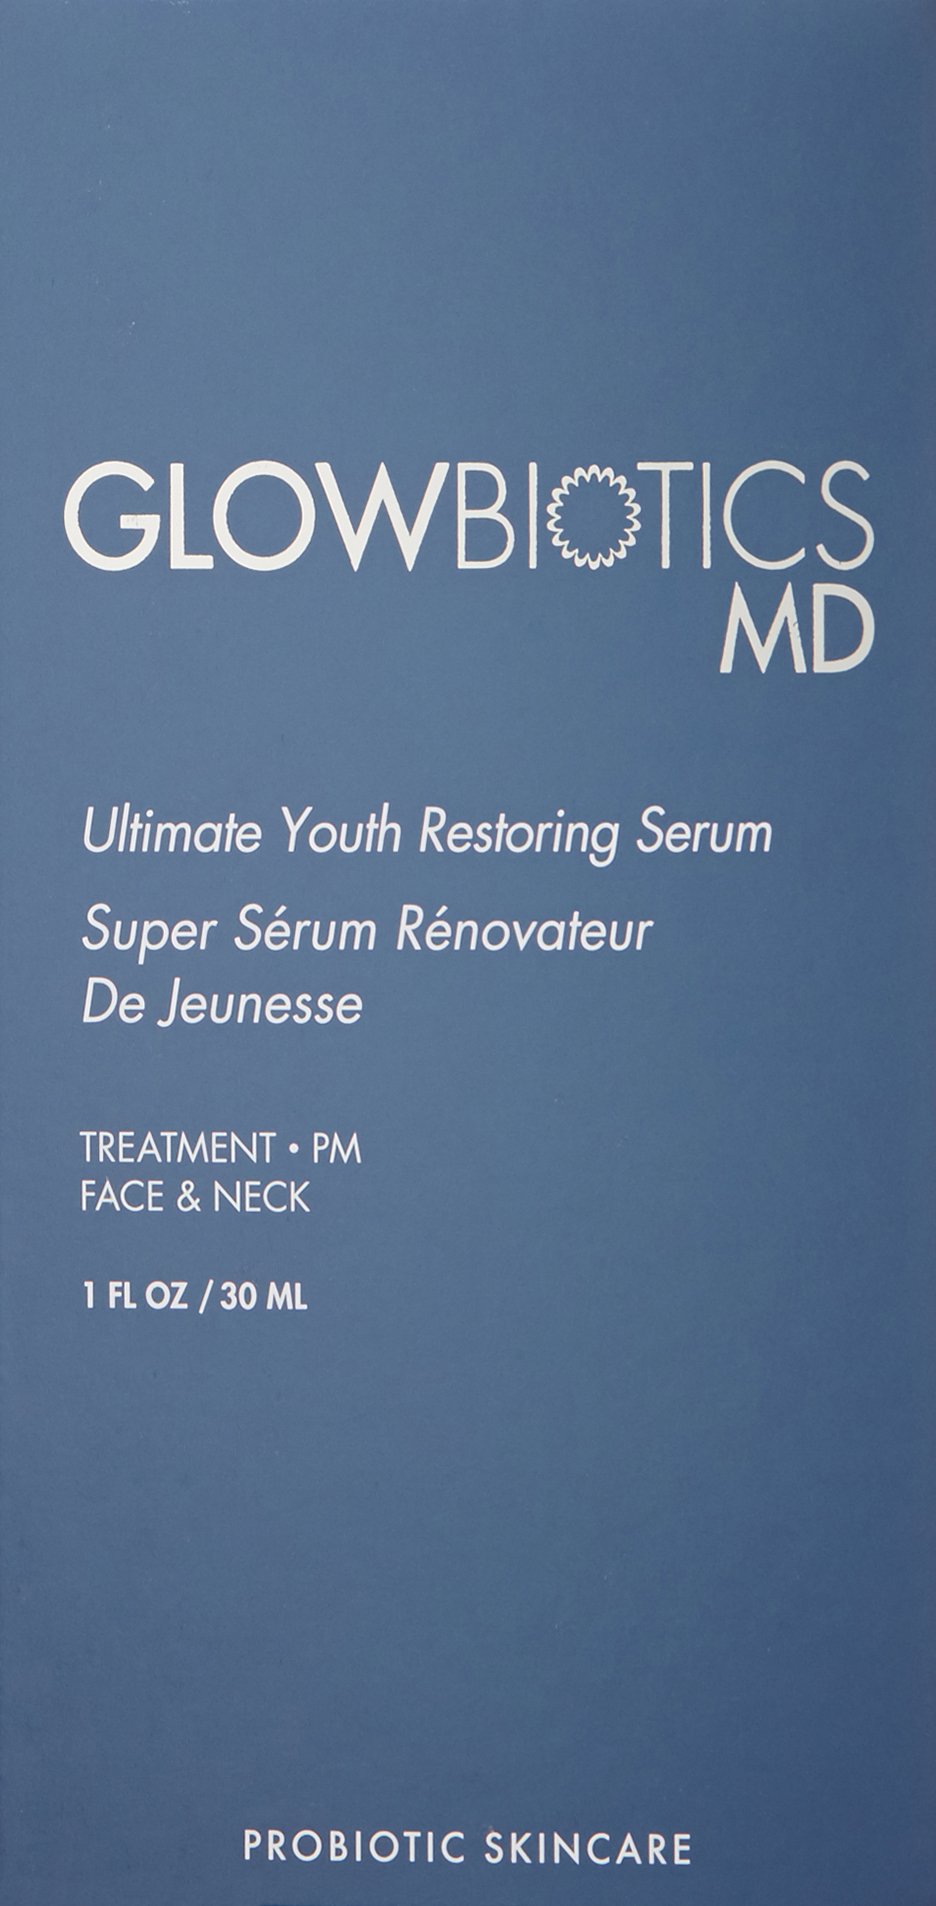 GLOWBIOTICS MD - Probiotic Ultimate Youth Restoring Serum Firm and Tighten Aging Skin - For Dry and Normal Skin Types (1 fl oz) - Made in the USA